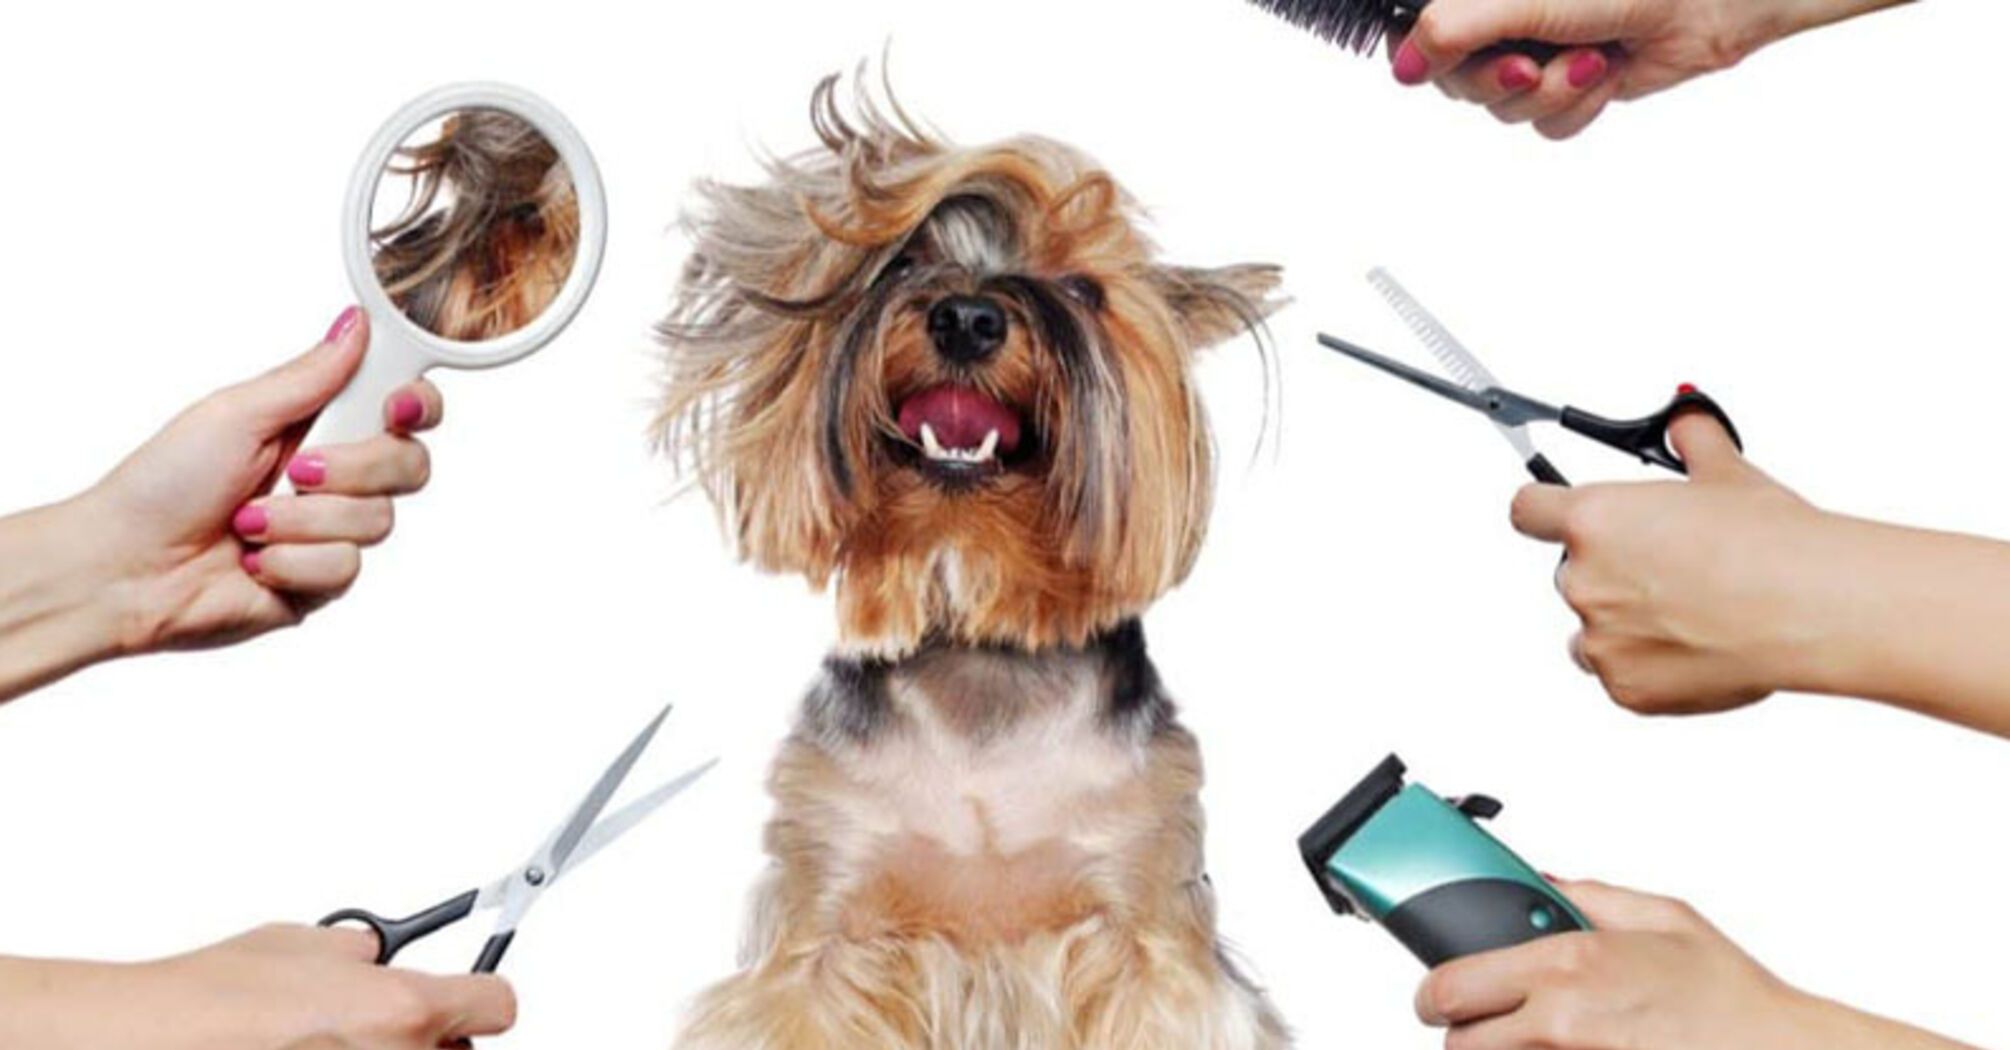 Why pets need grooming